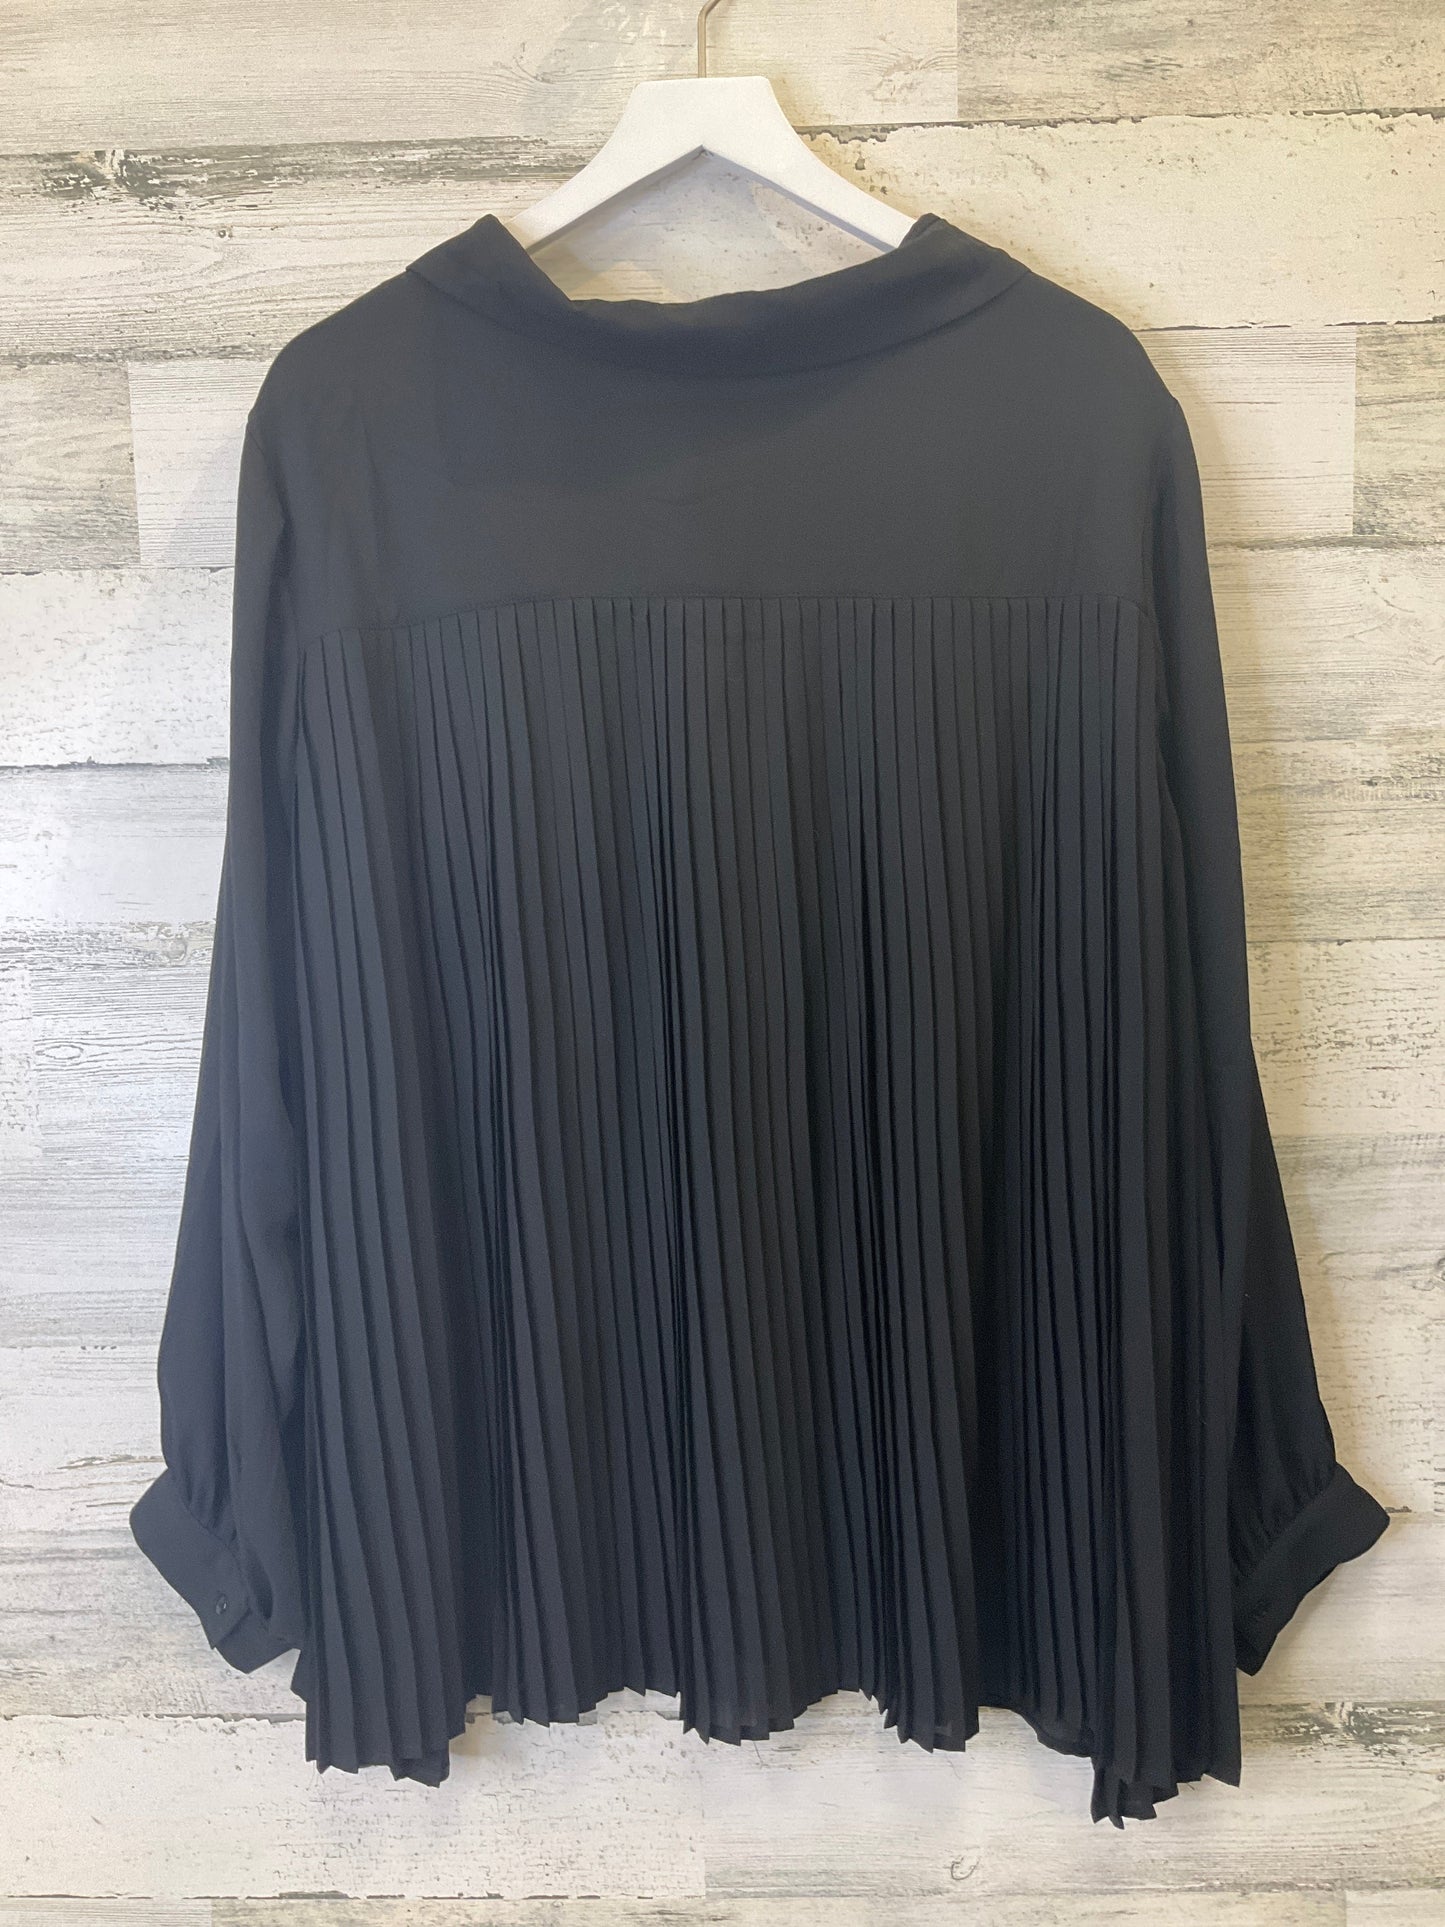 Black Blouse Long Sleeve Adrianna Papell, Size 3x